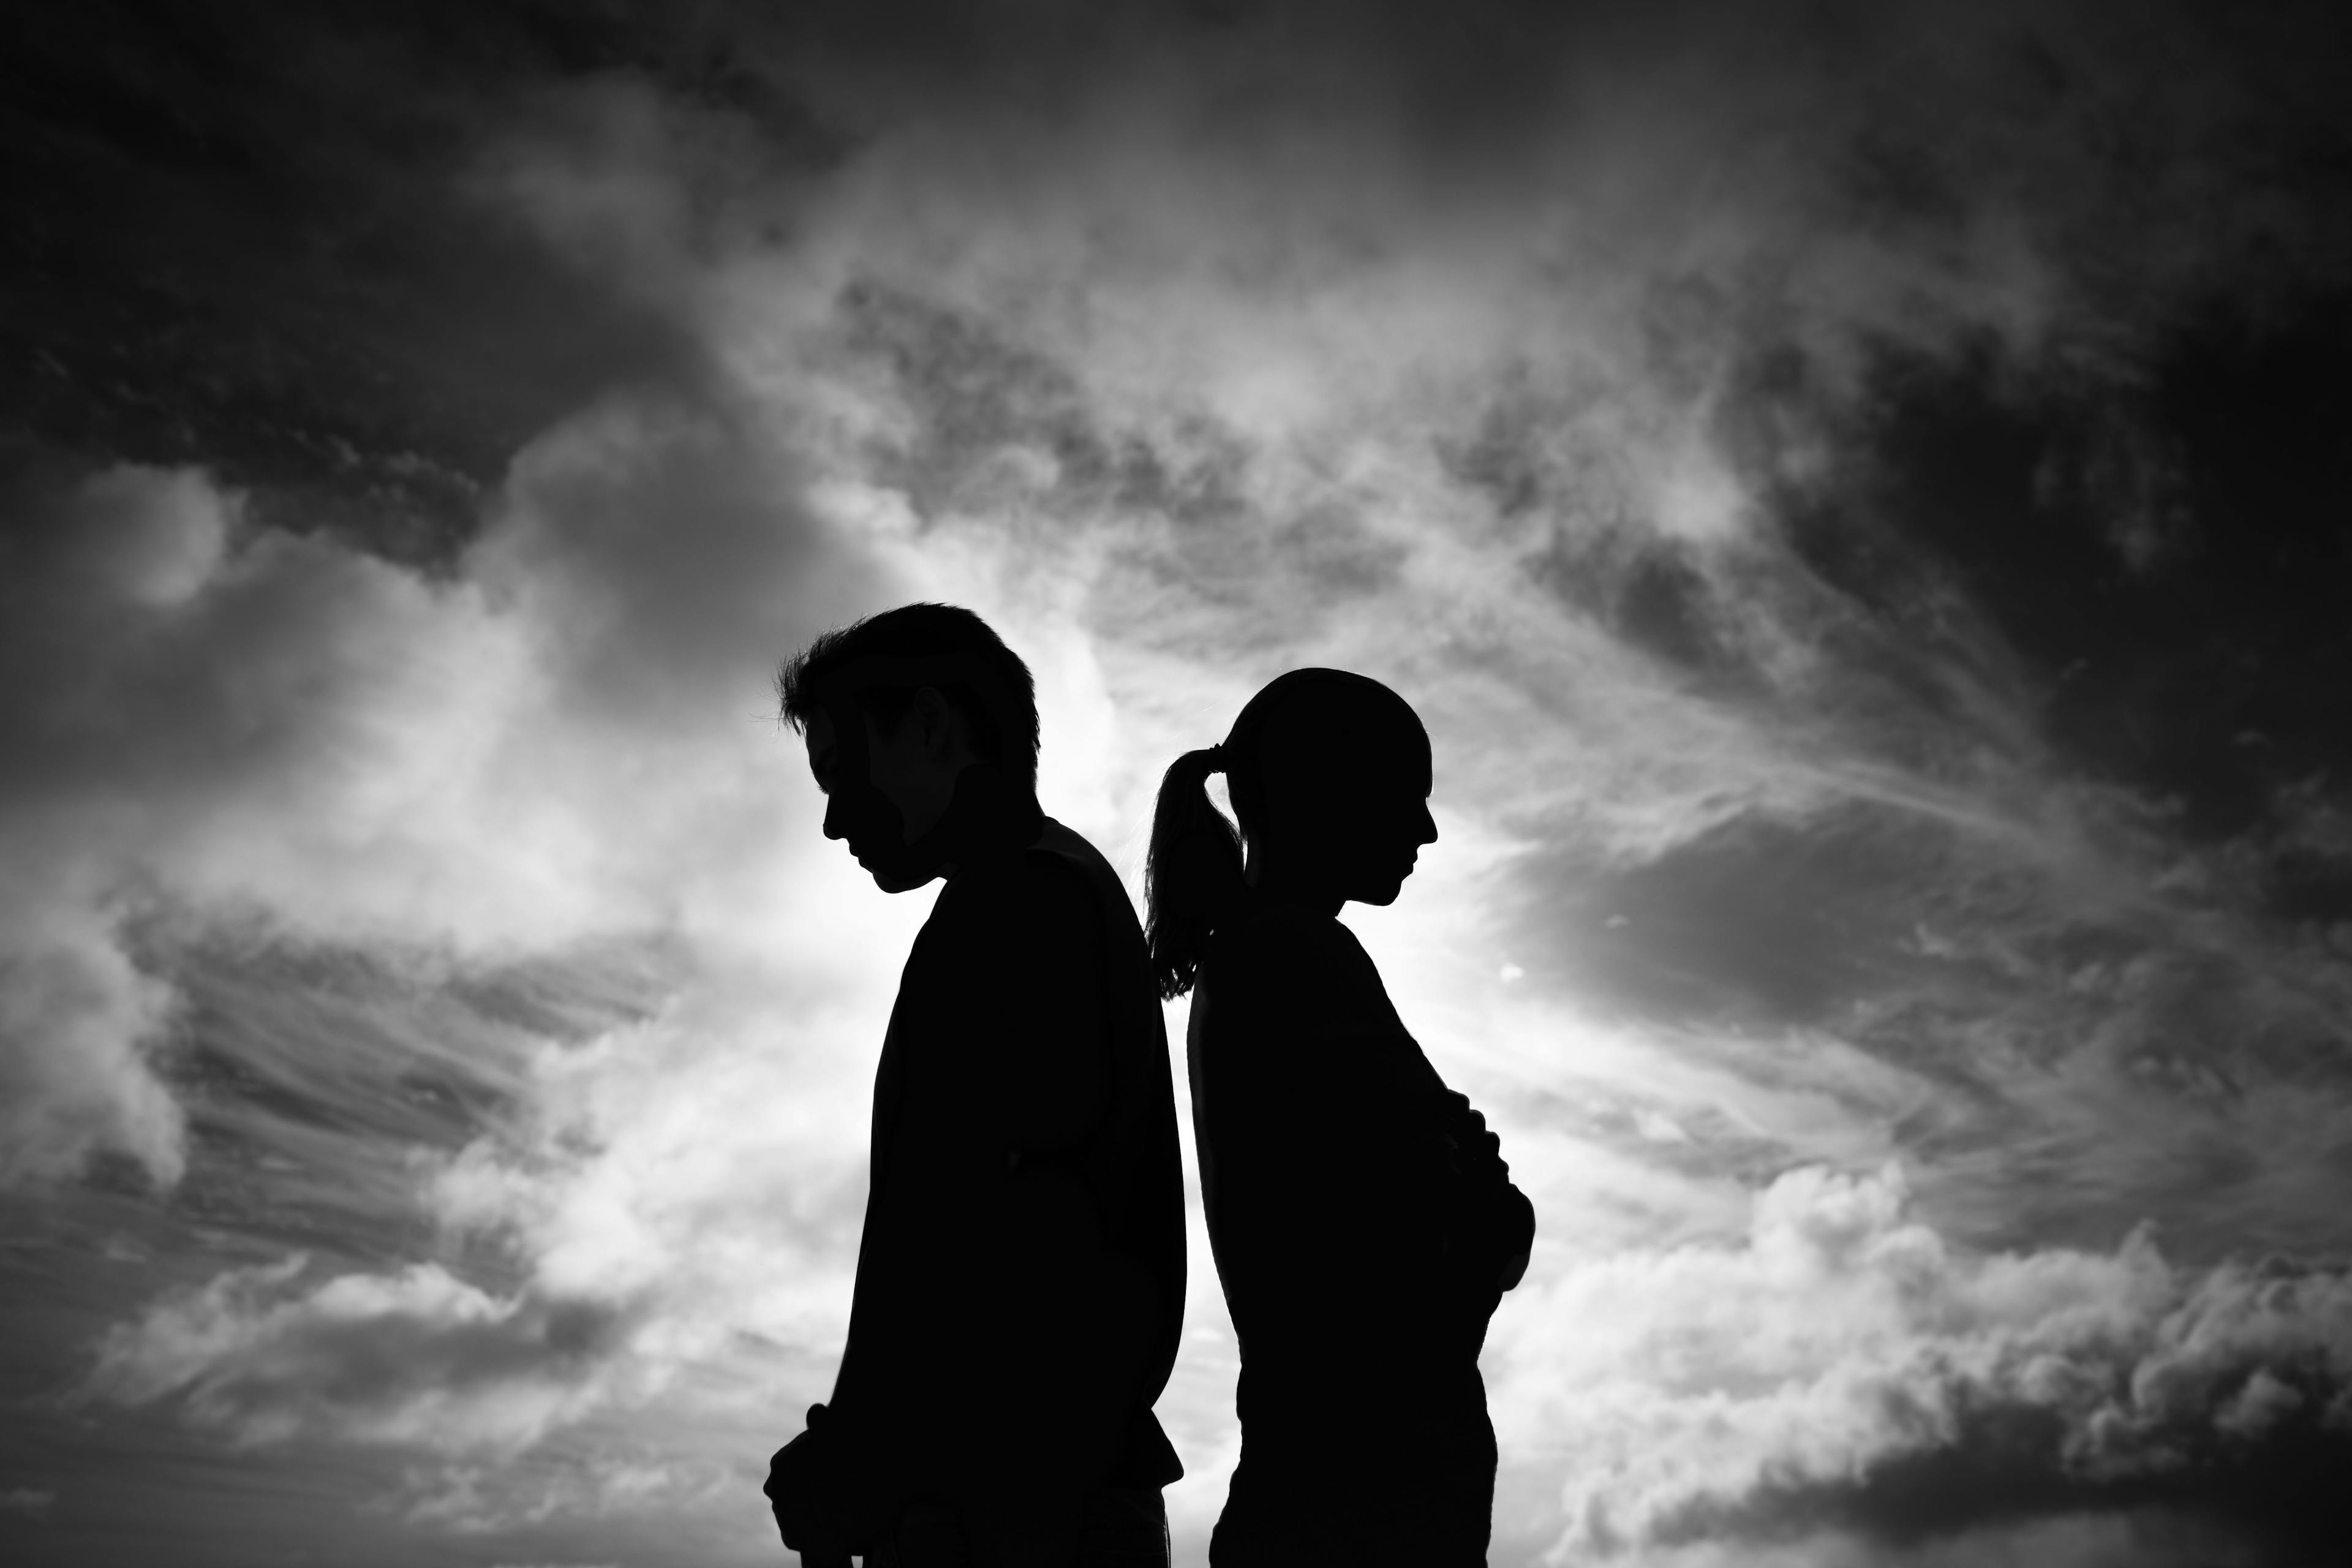 Mental health experts can help identify false allegations and alienation during divorce proceedings.